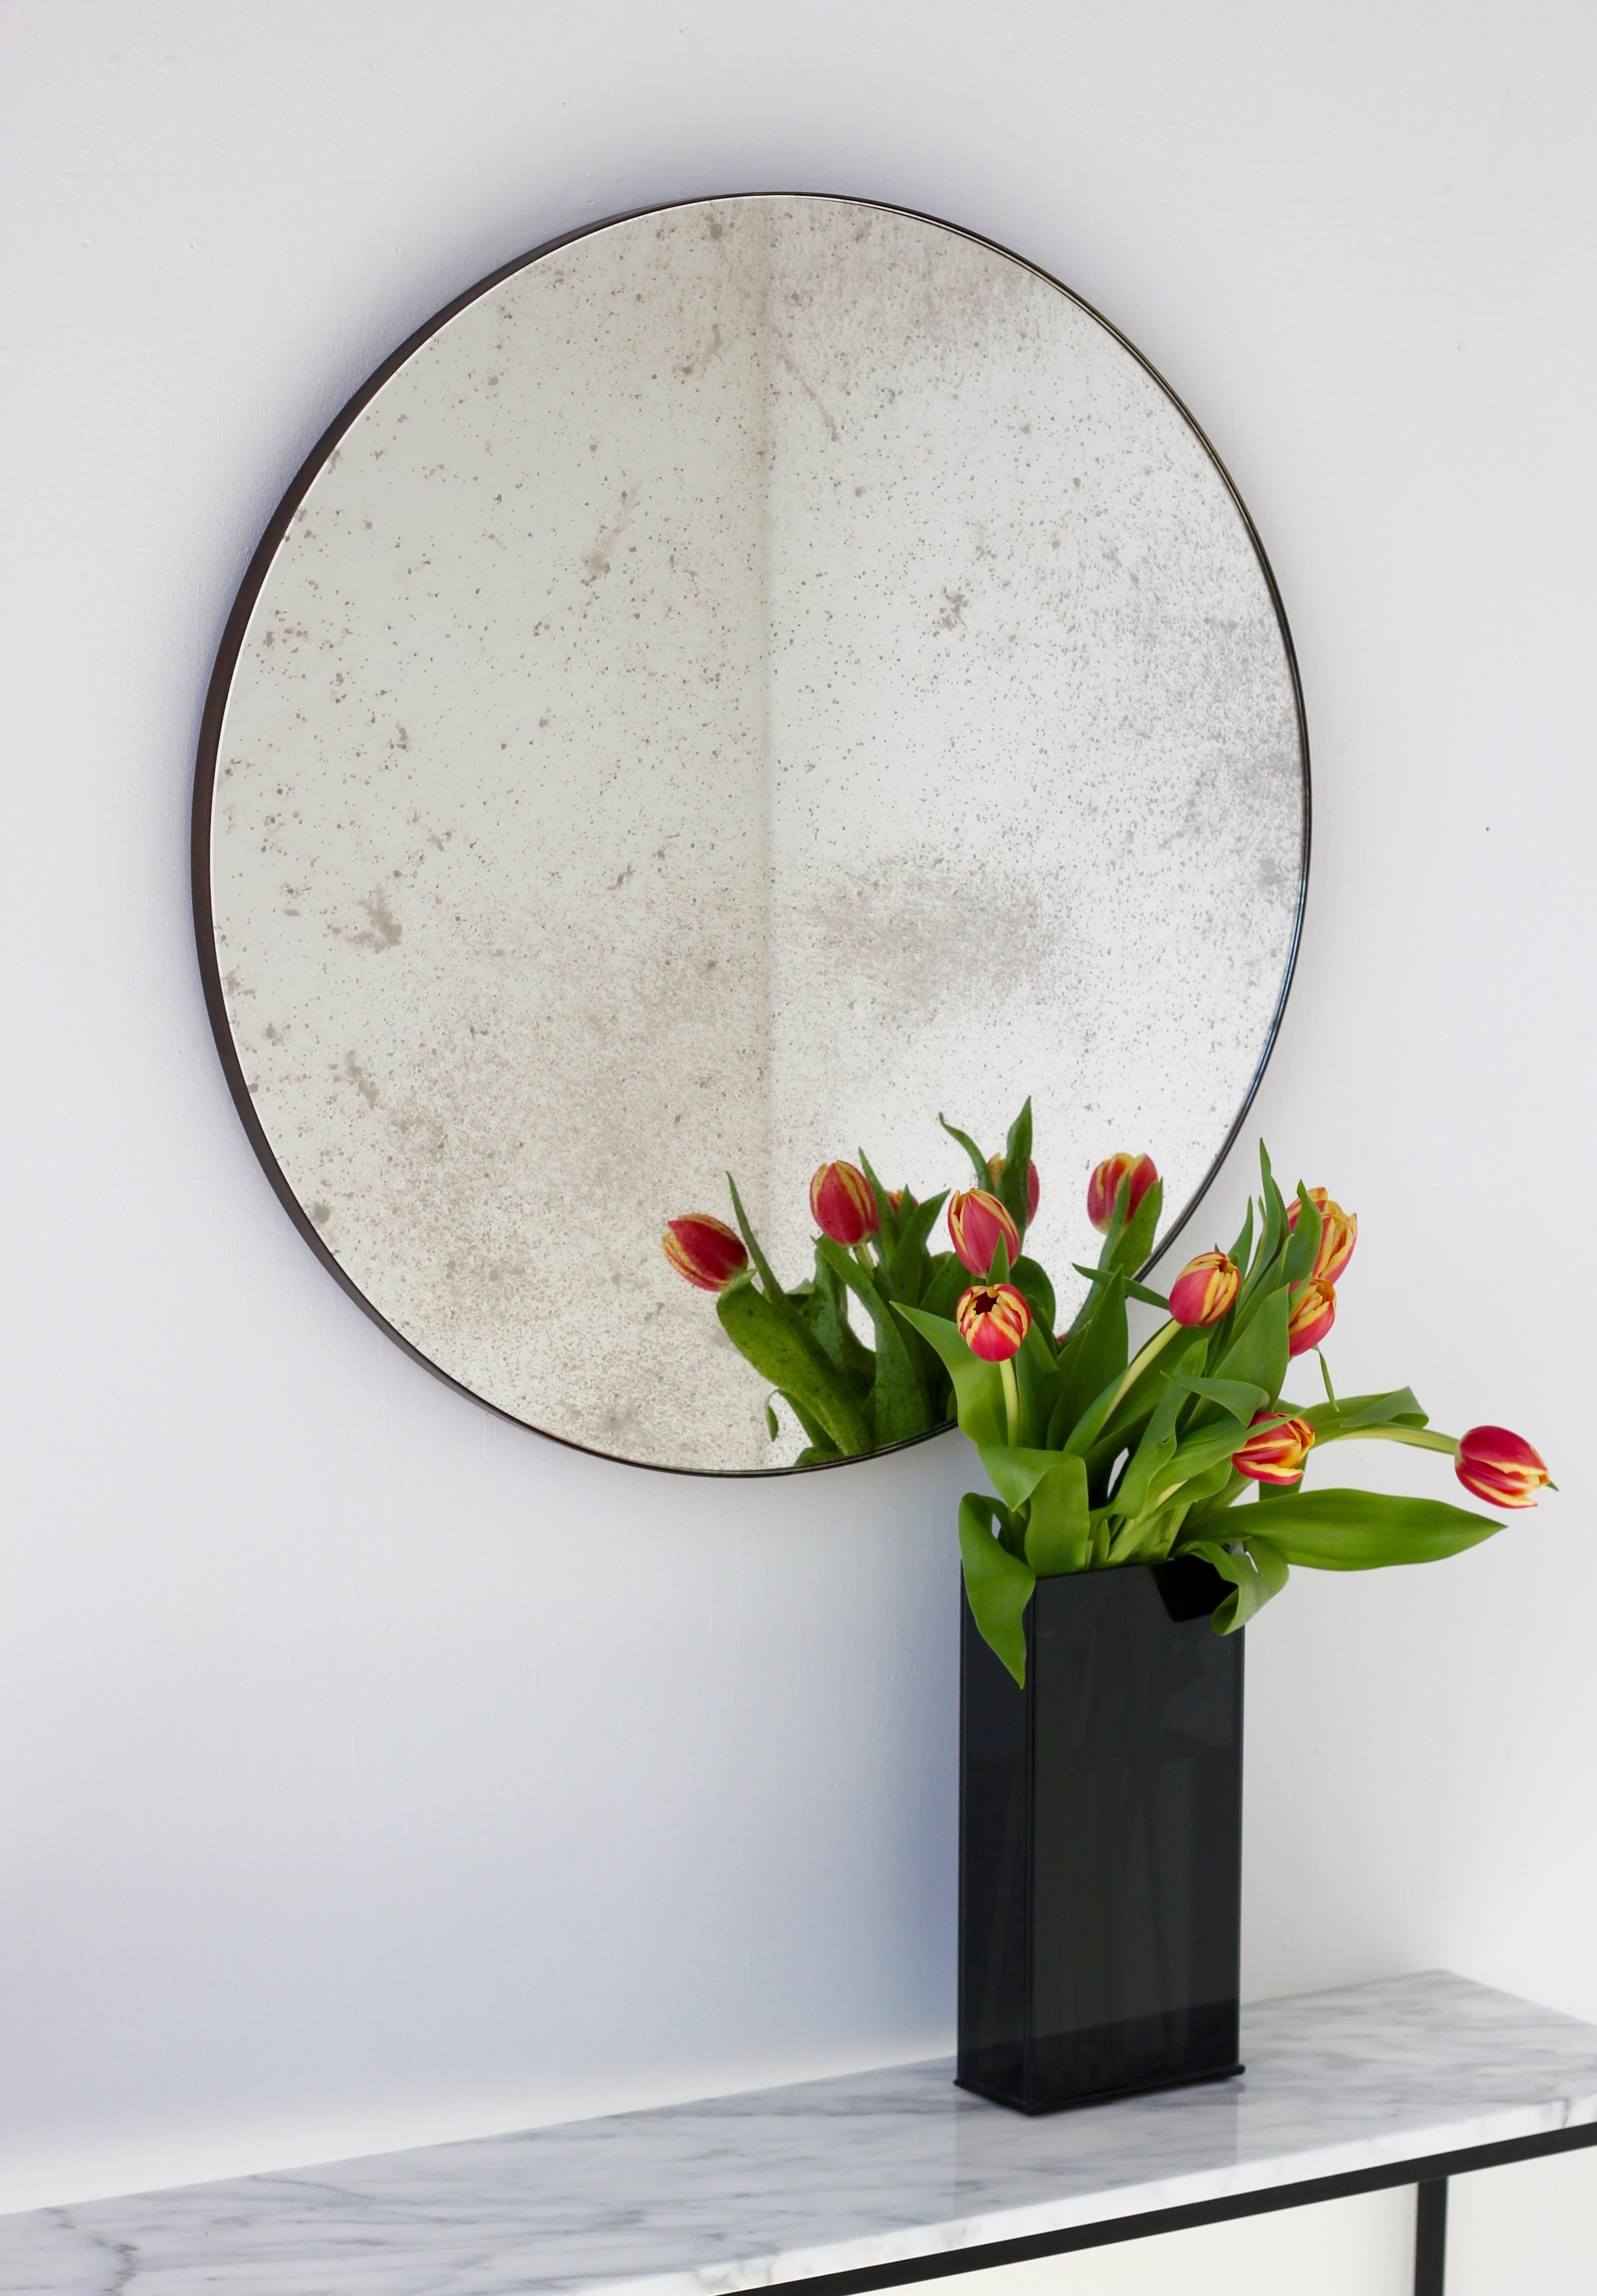 Delightful antiqued Orbis™ round mirror with a minimalist bronze patina brass frame. Designed and handcrafted in London, UK.

Medium, large and extra-large mirrors (60, 80 and 100cm) are fitted with an ingenious French cleat (split batten) system so